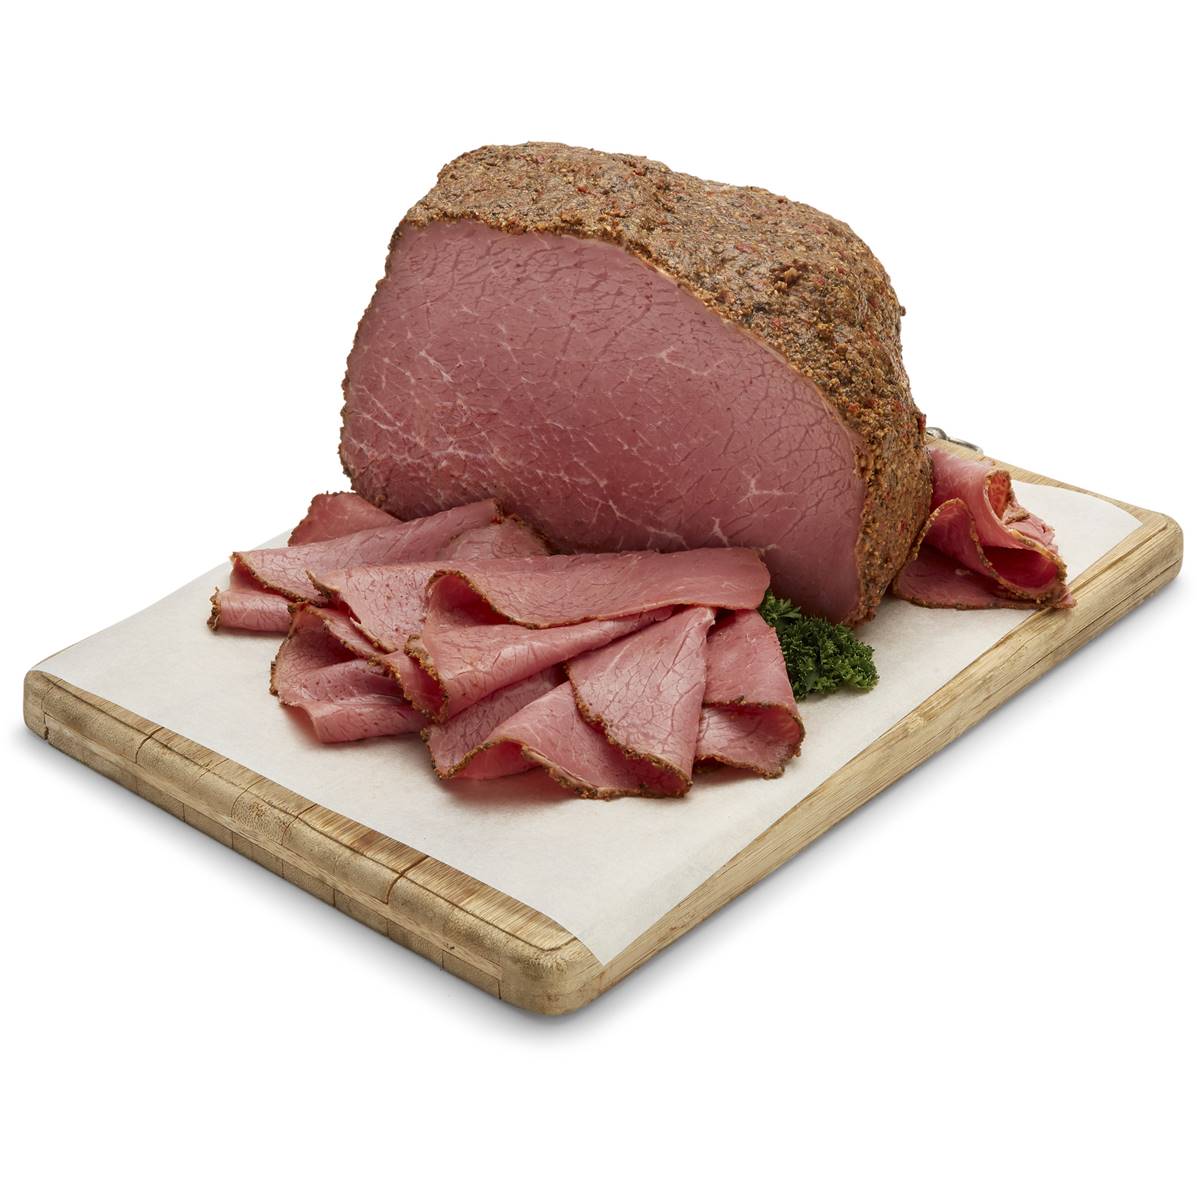 Calories in Woolworths Smoked Beef Pastrami Freshly Shaved From The Deli